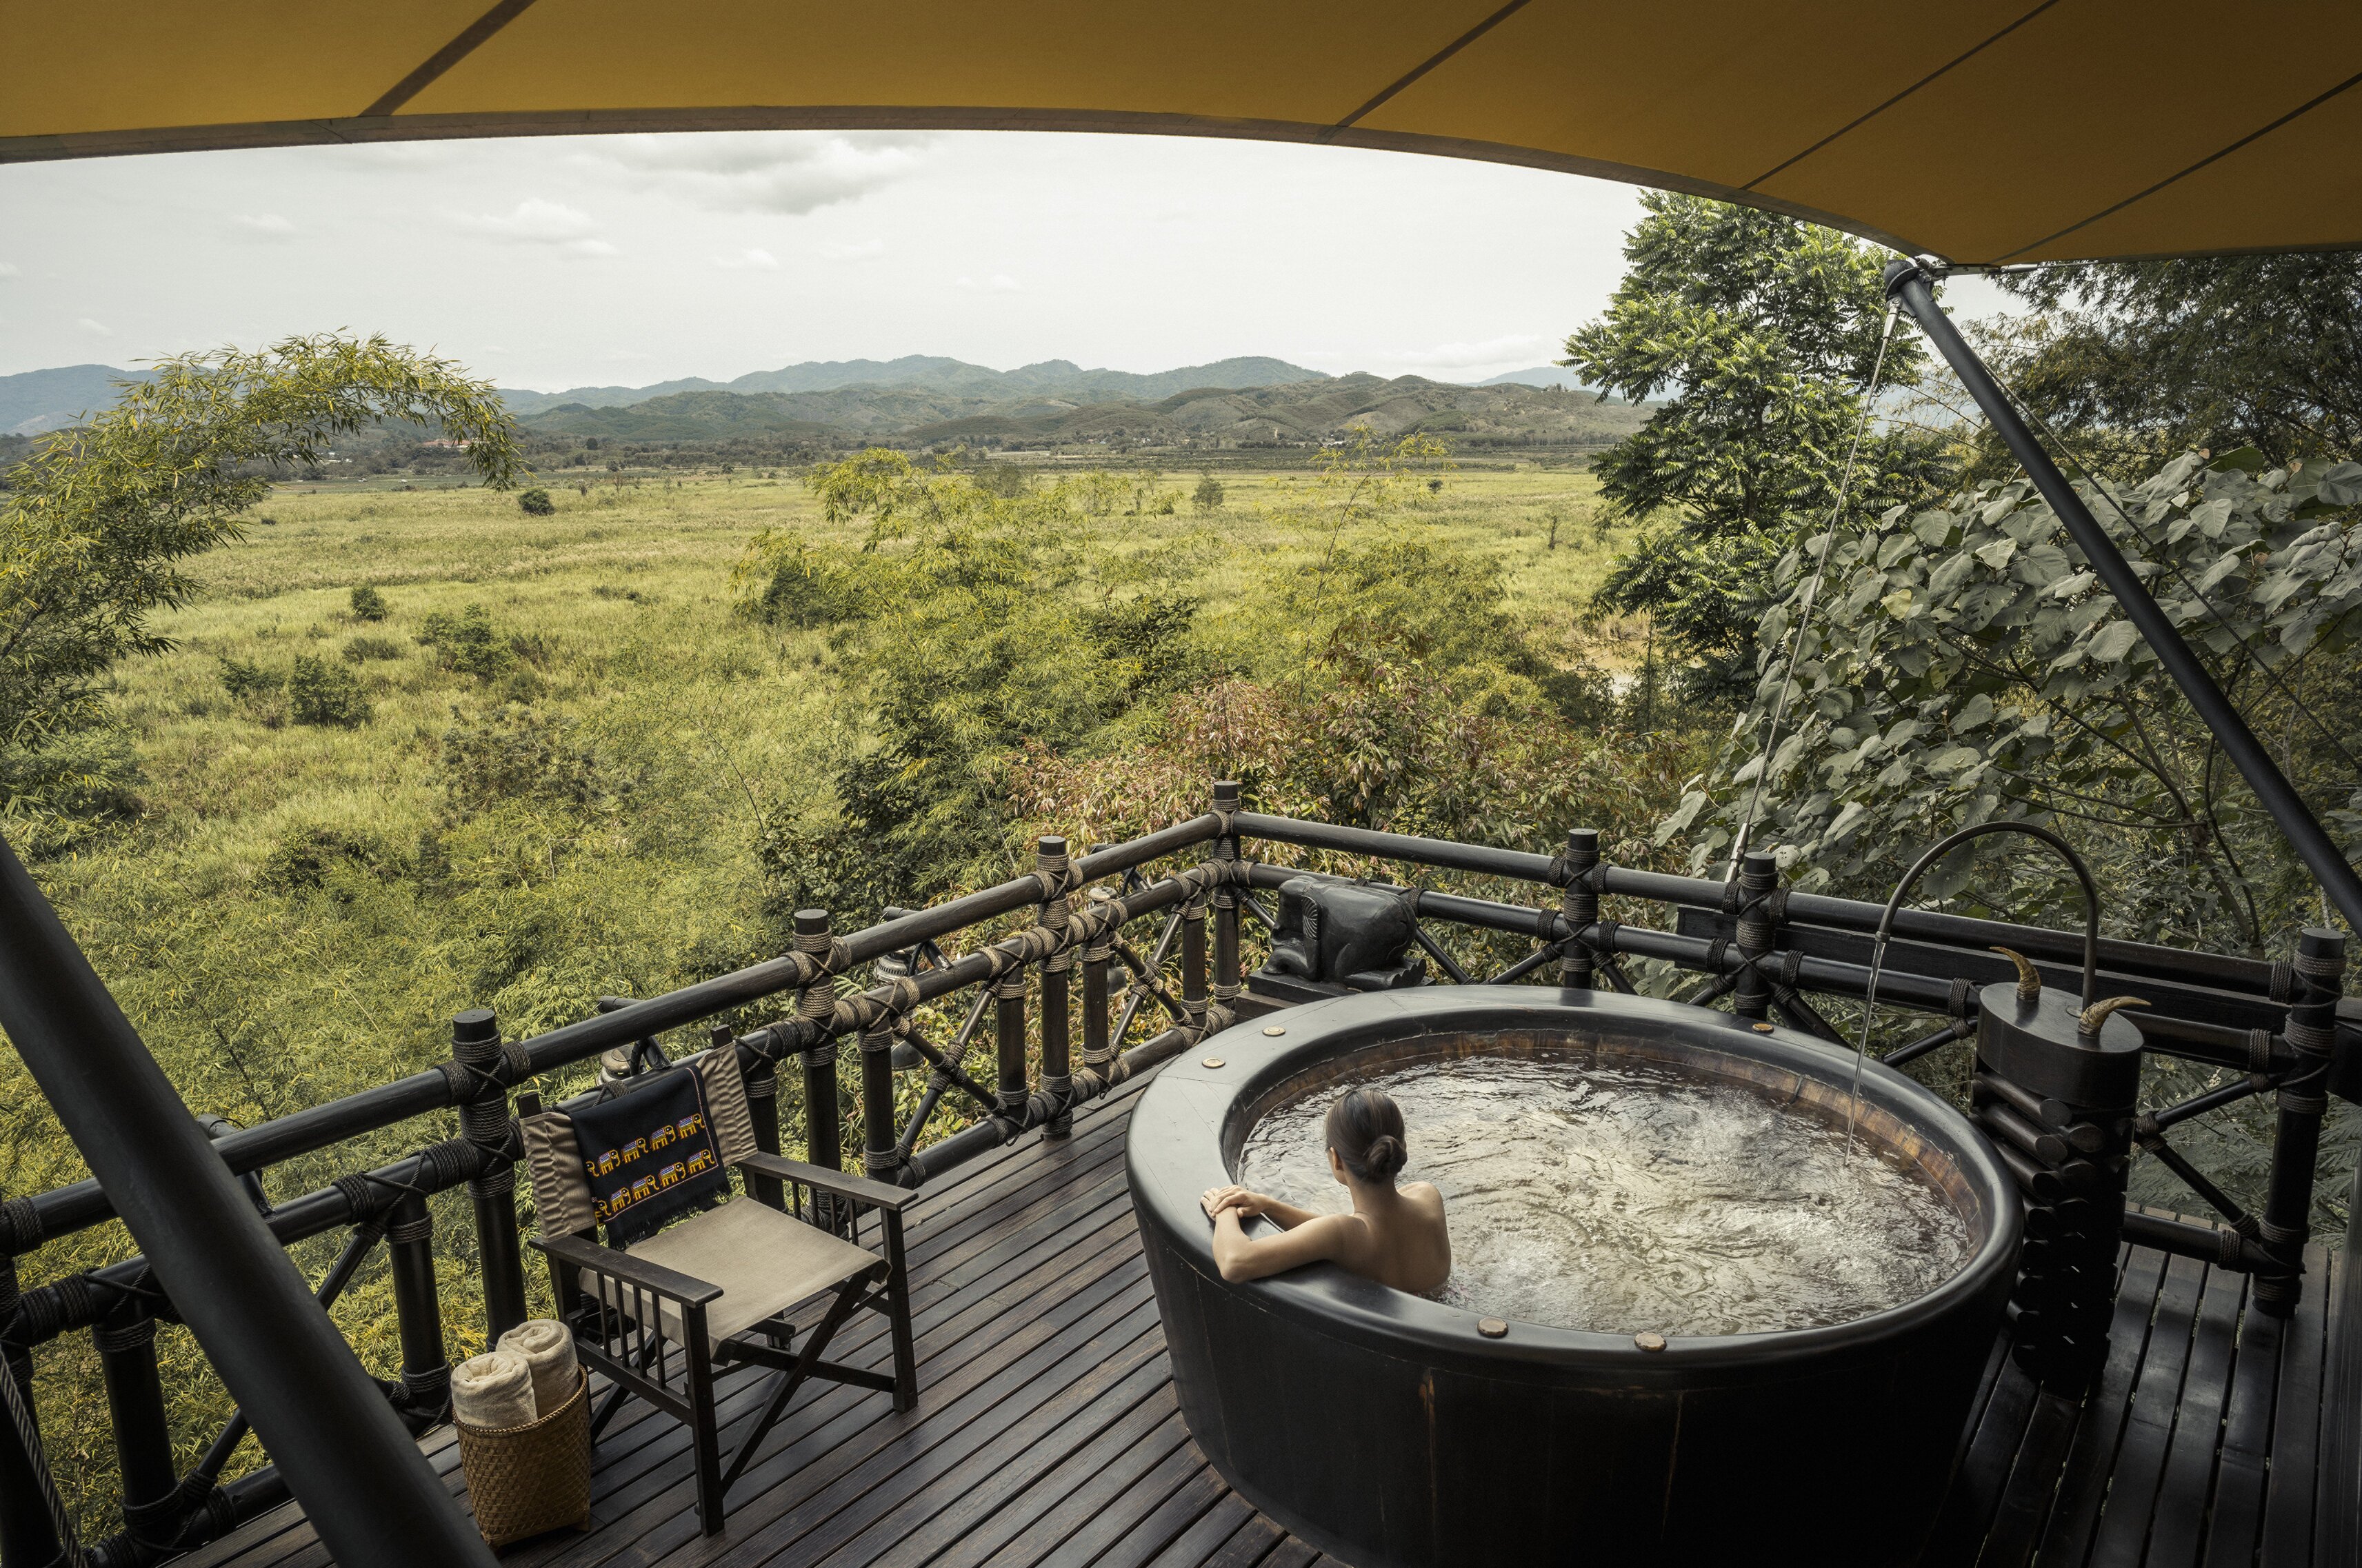 DISCOVER UNUSUAL PLACES TO STAY: Four Seasons Tented Camp Golden 創意旅宿 - 叢林裡的野奢帳篷